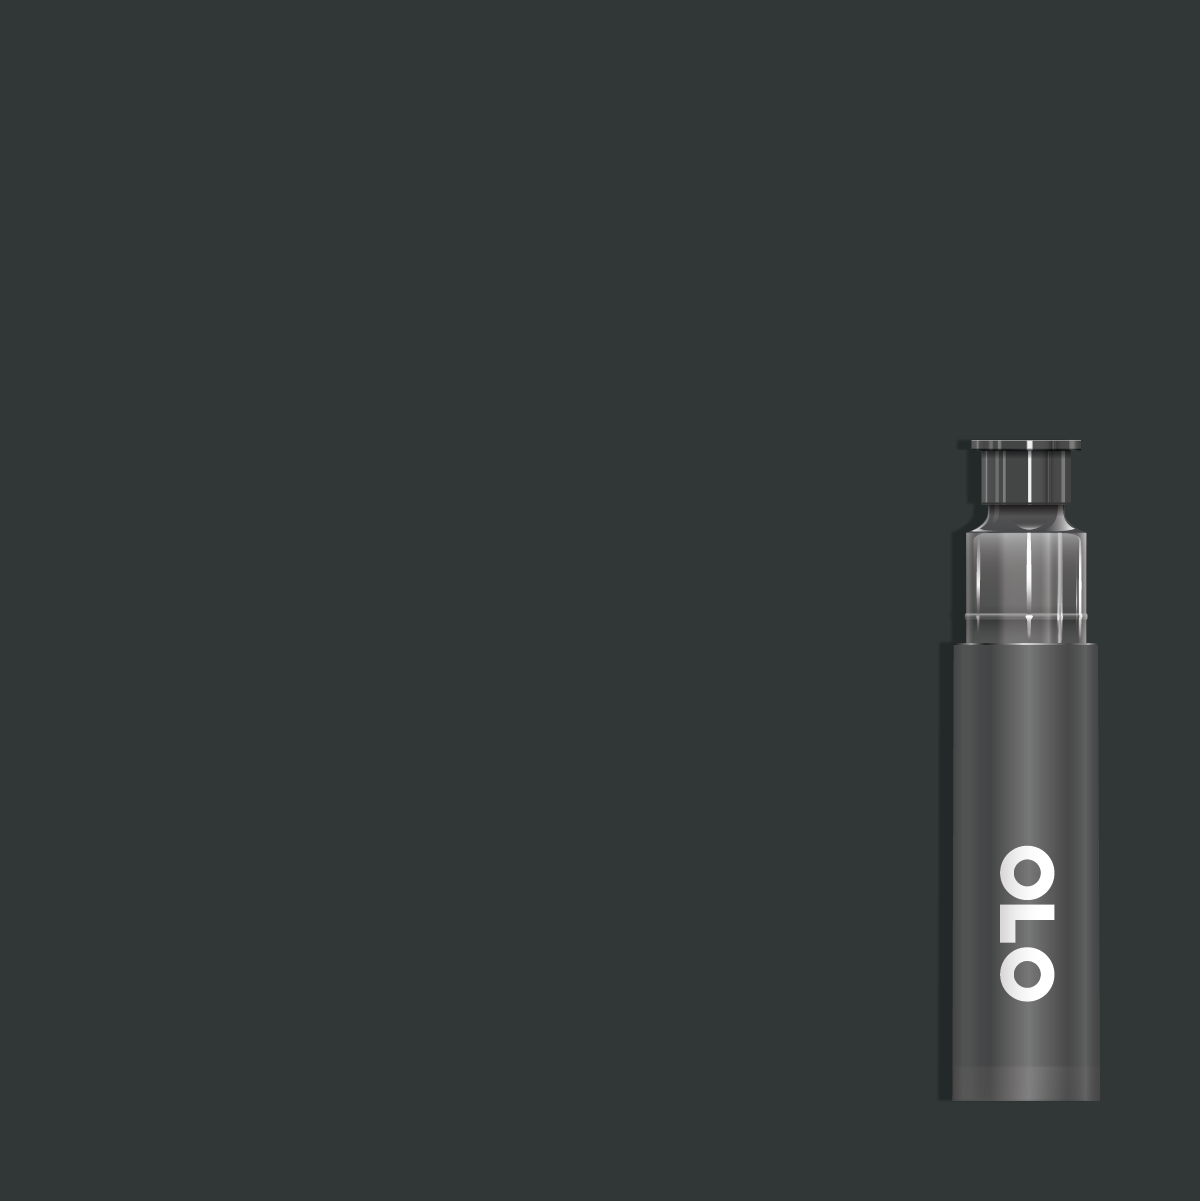 OLO CG7 Cool Gray 7 Replacement Cartridge